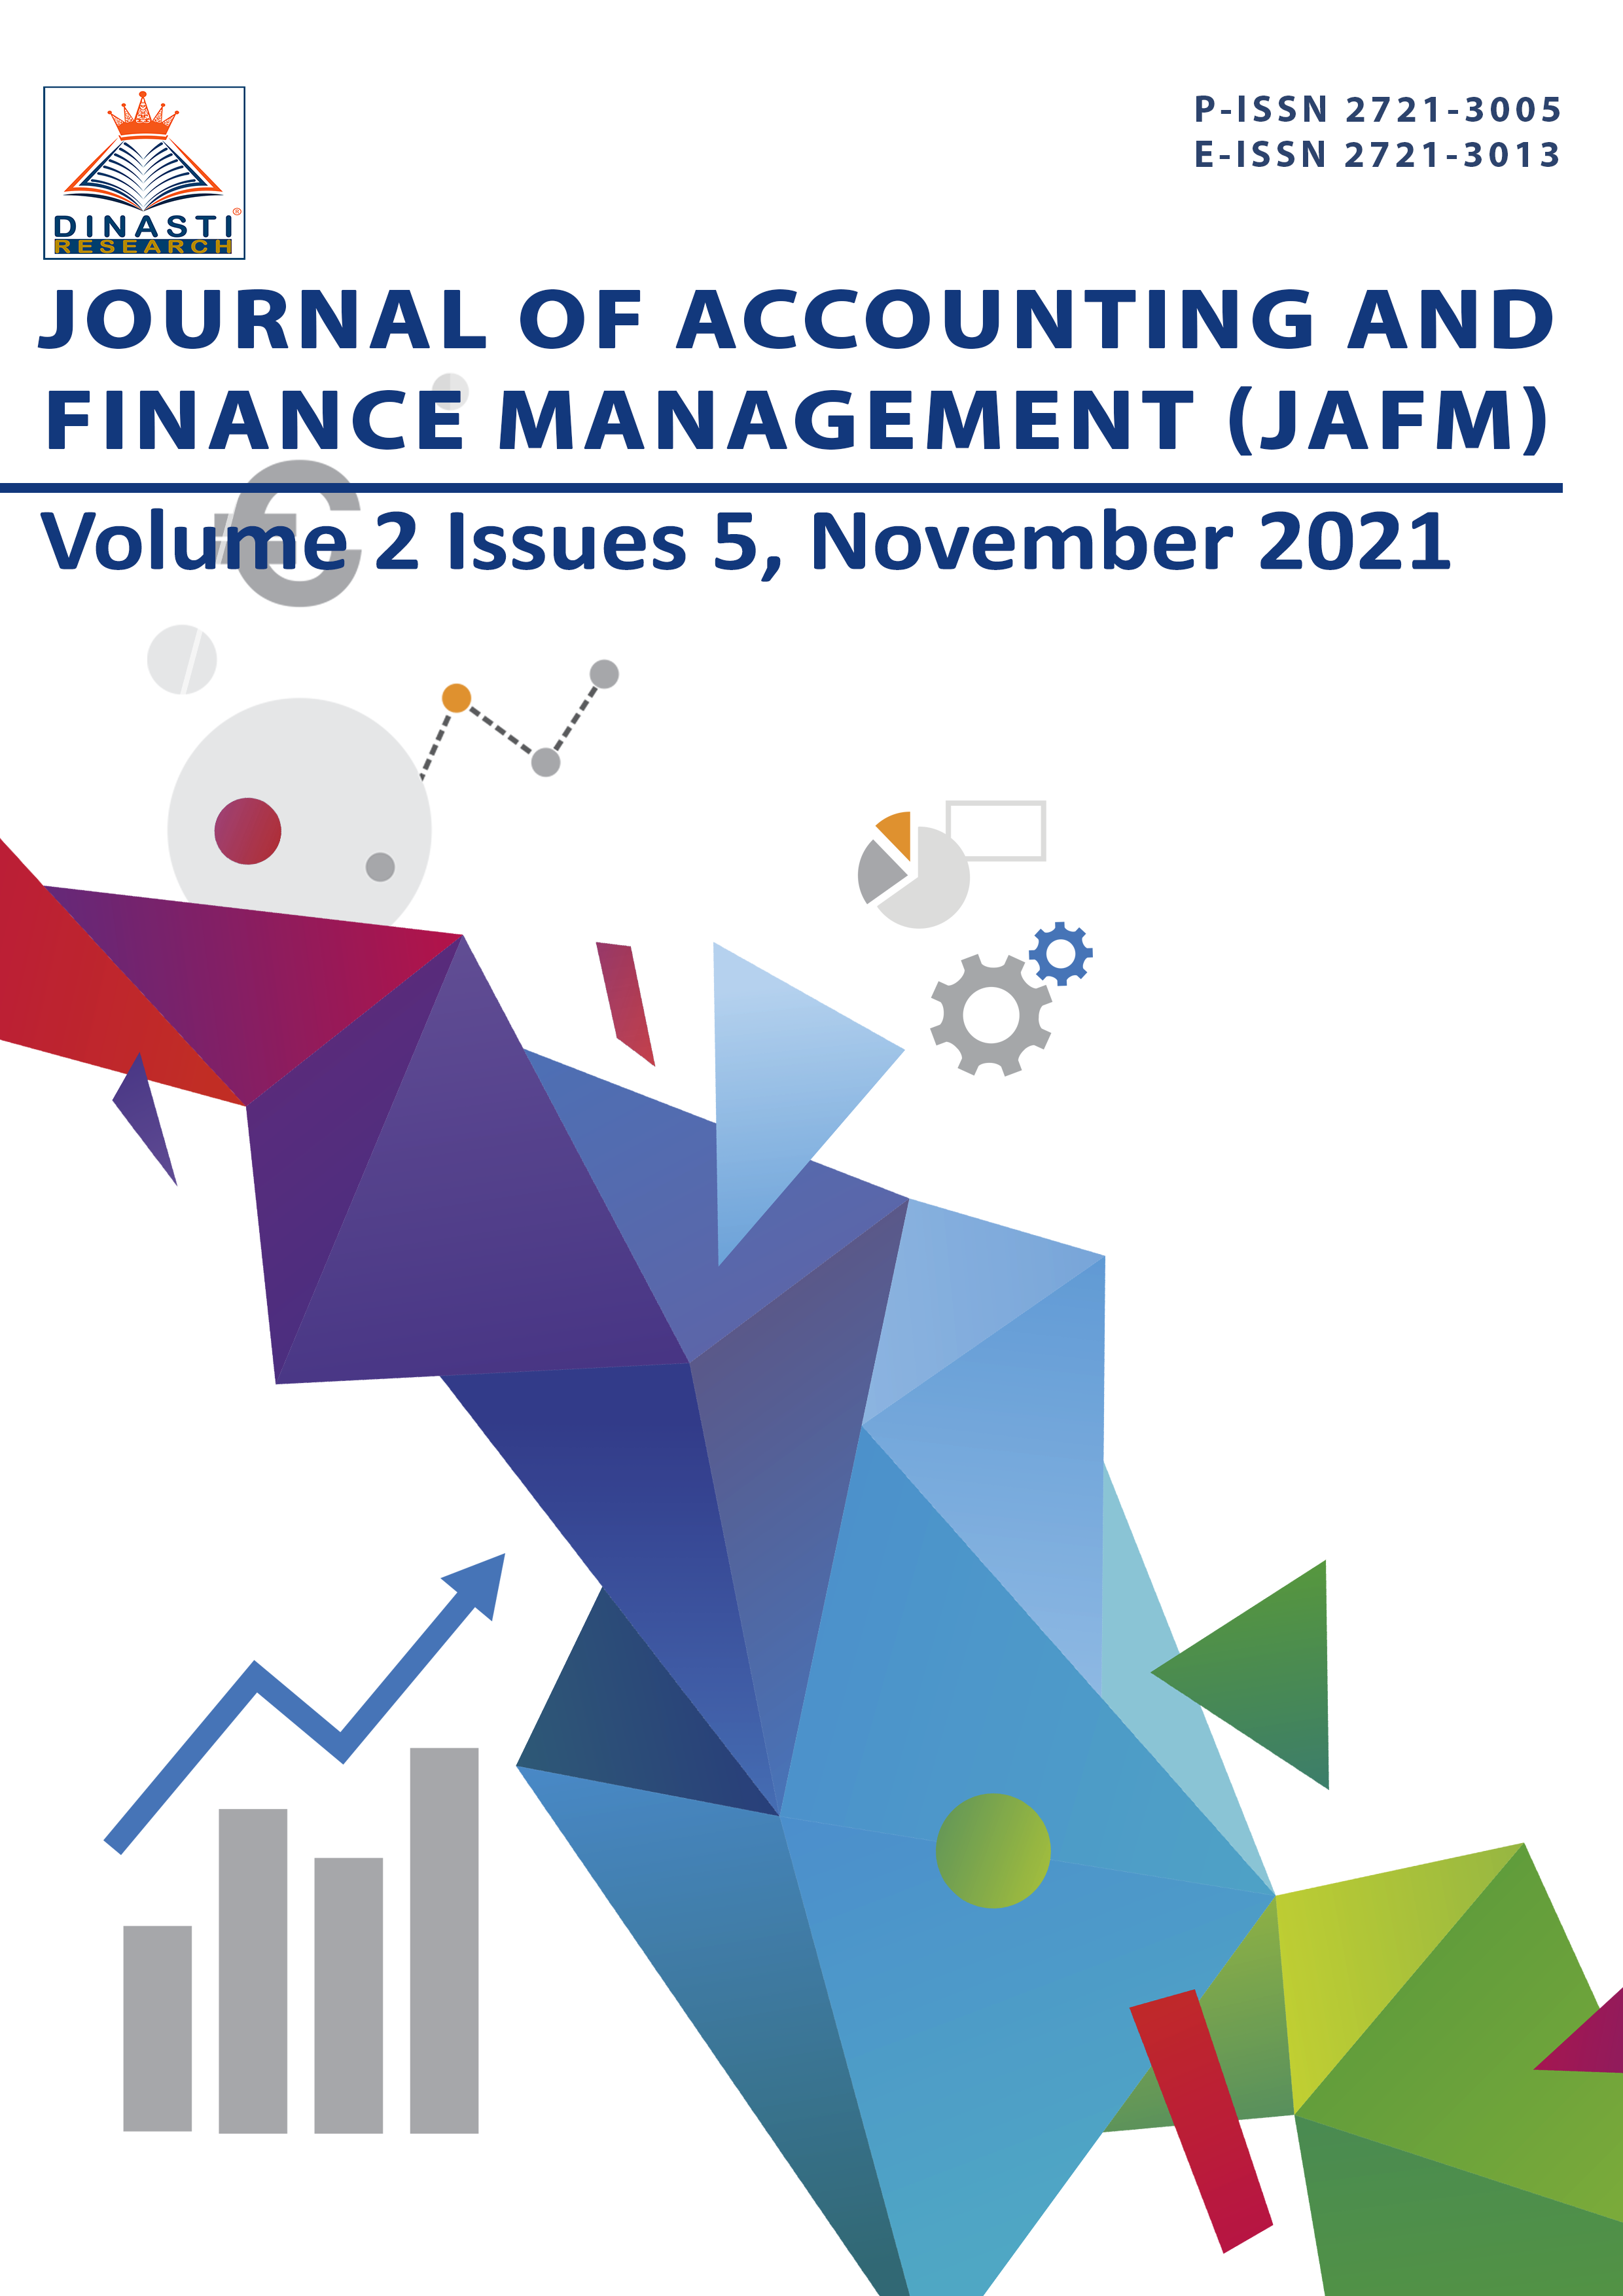 					View Vol. 2 No. 5 (2021): Journal of Accounting and Finance Management (November-December 2021)
				